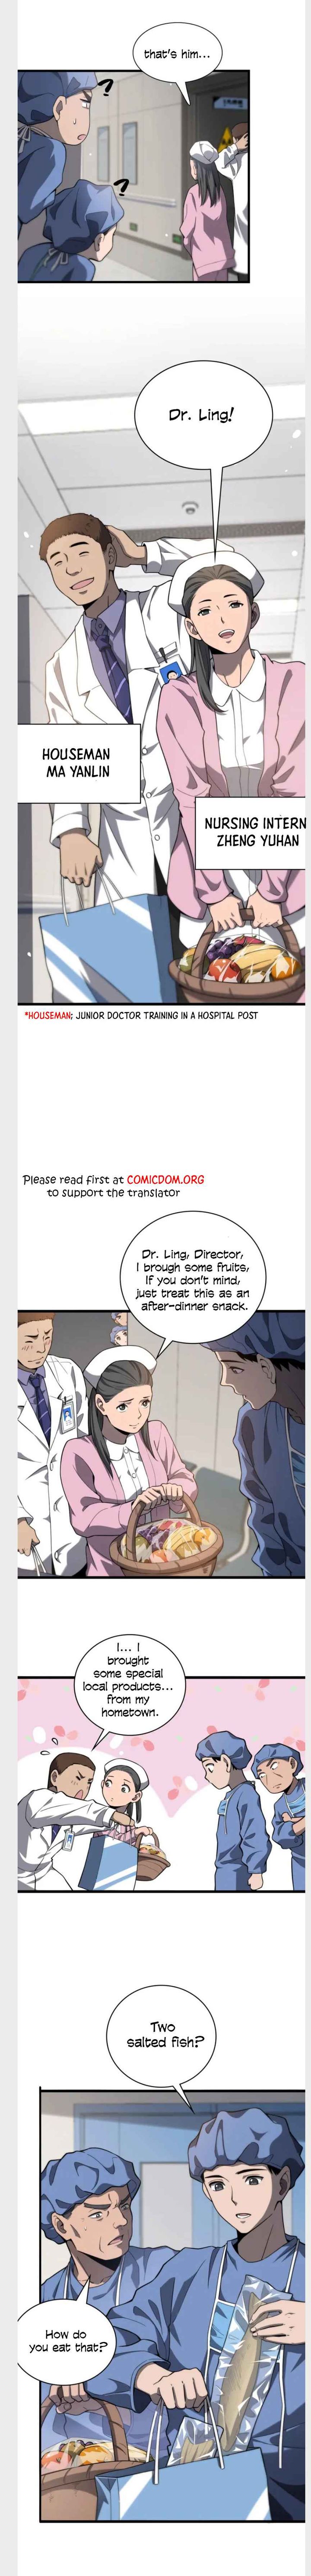 great_doctor_ling_ran_32_8